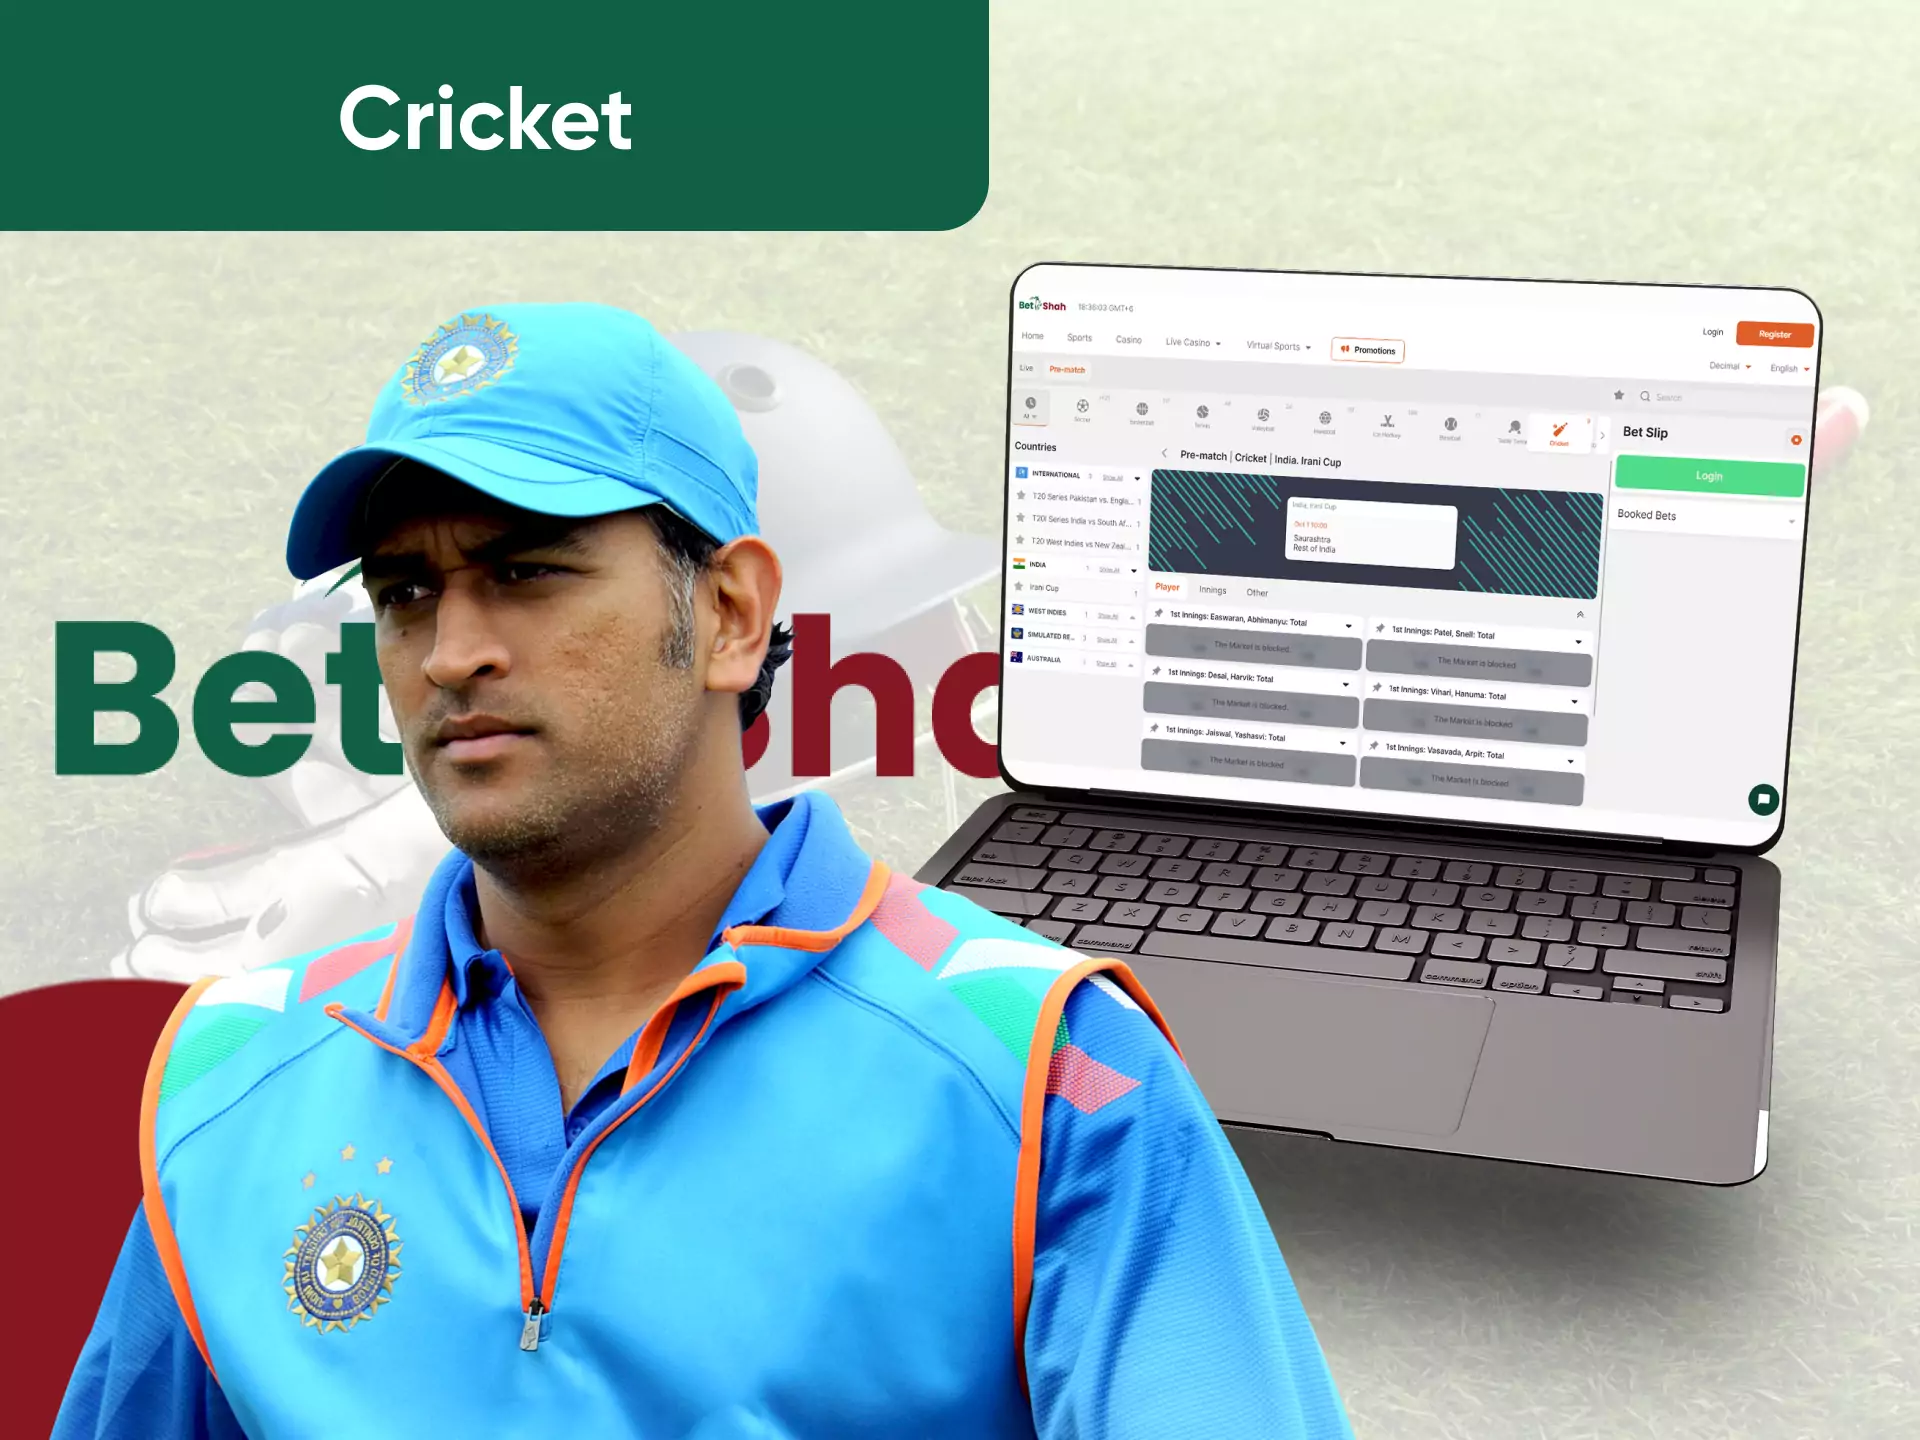 On Betshah, you can place bets on cricket tournaments.